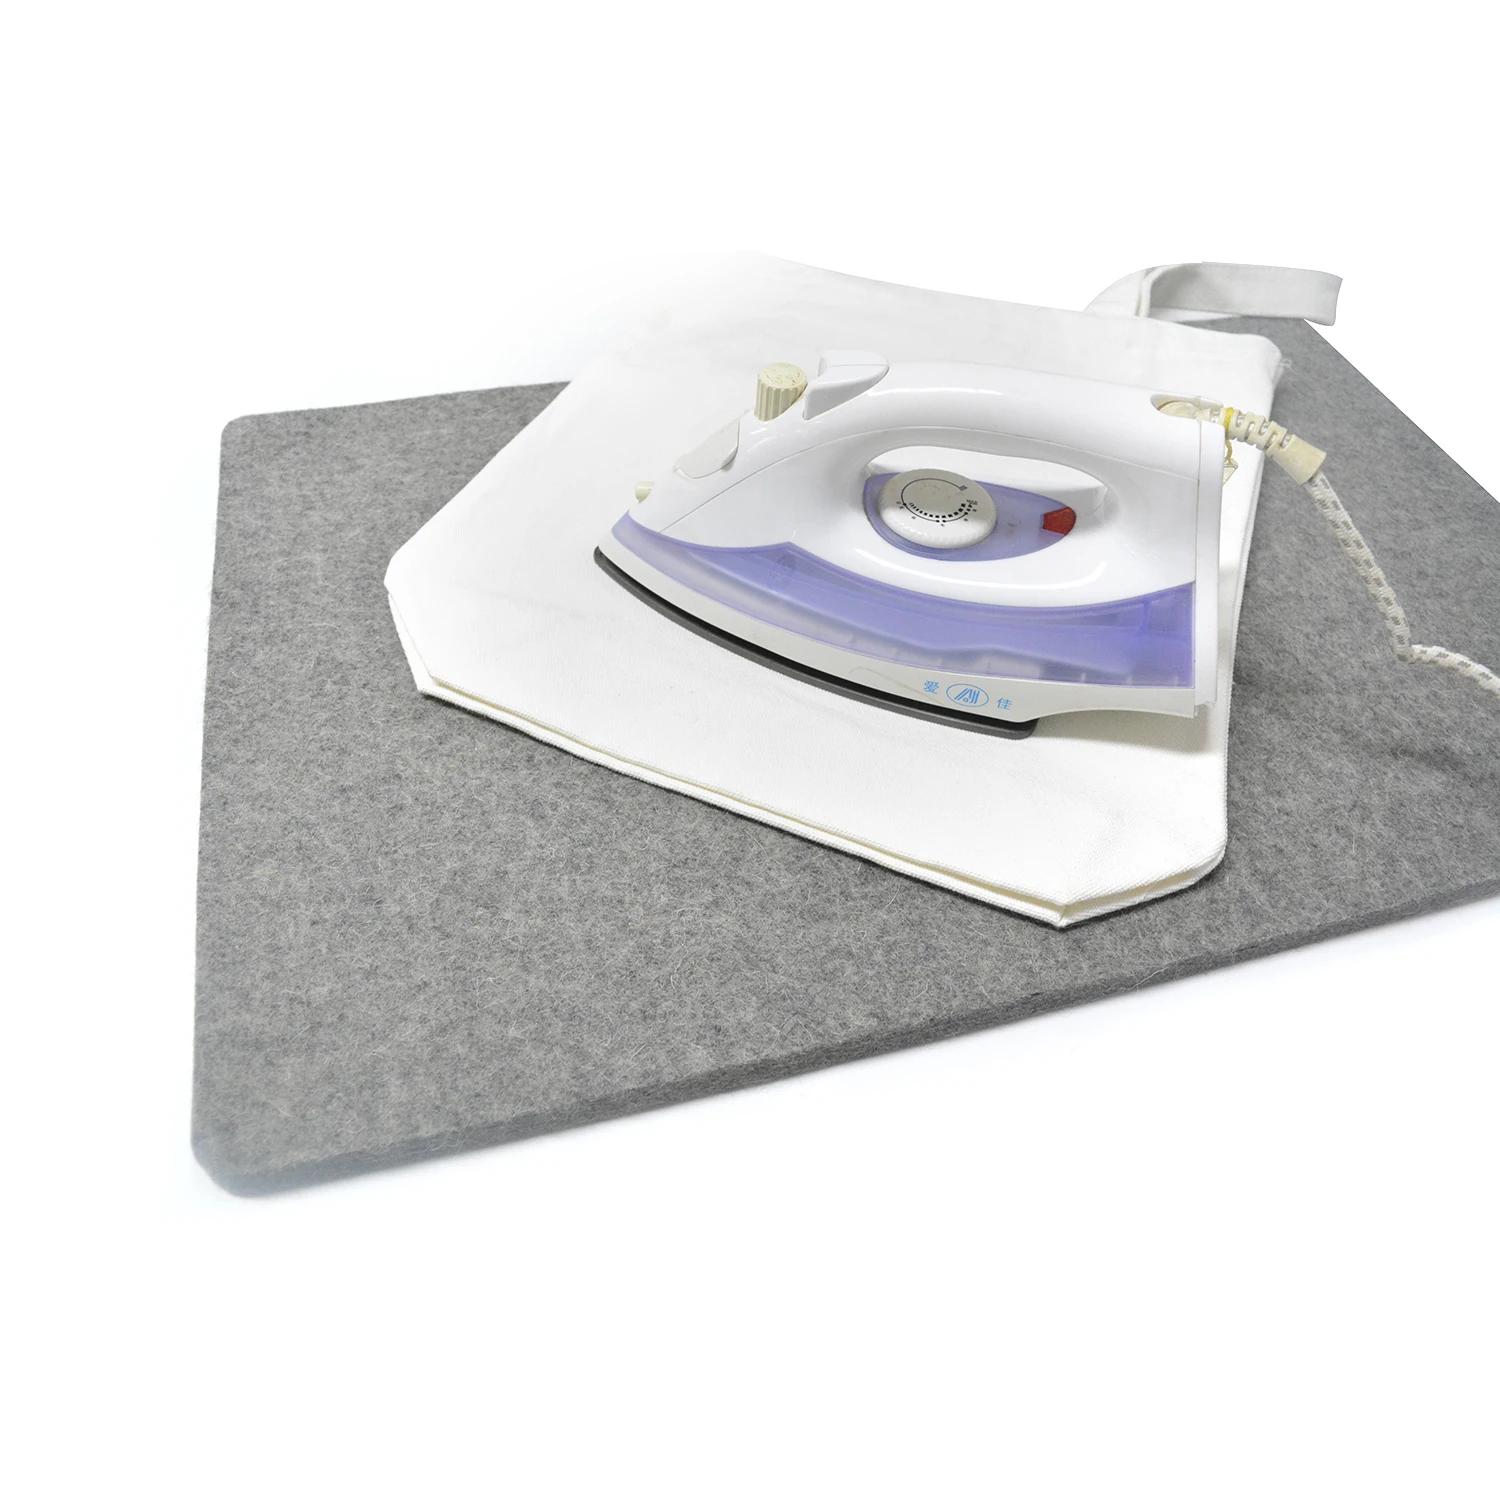 Portable Perfect Quilting Sewing Pressing Seams Wool Ironing Pad Pressing Mat For Quilters (1600122036547)